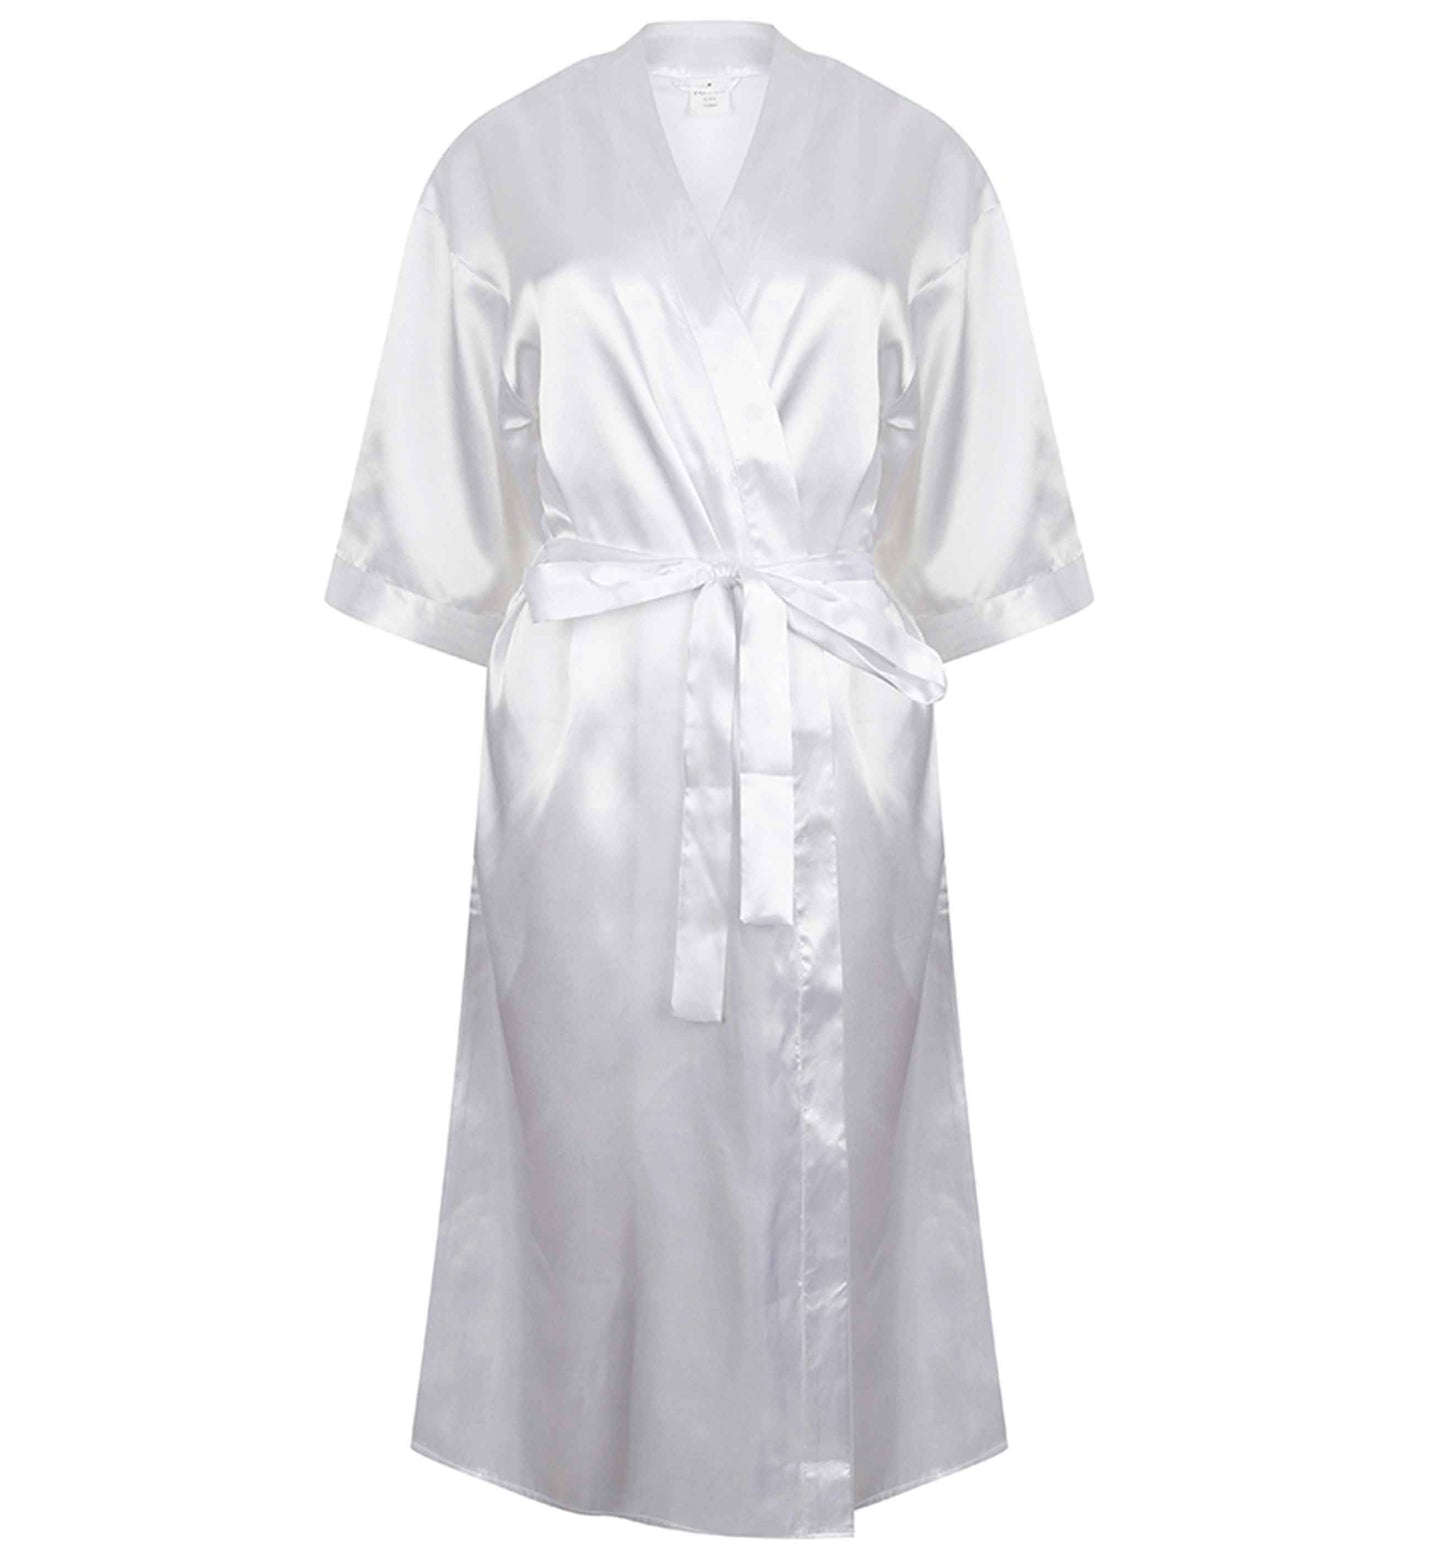 Happy Mother's day love from the bump - pink  | 8-18 | Kimono style satin robe | Ladies dressing gown